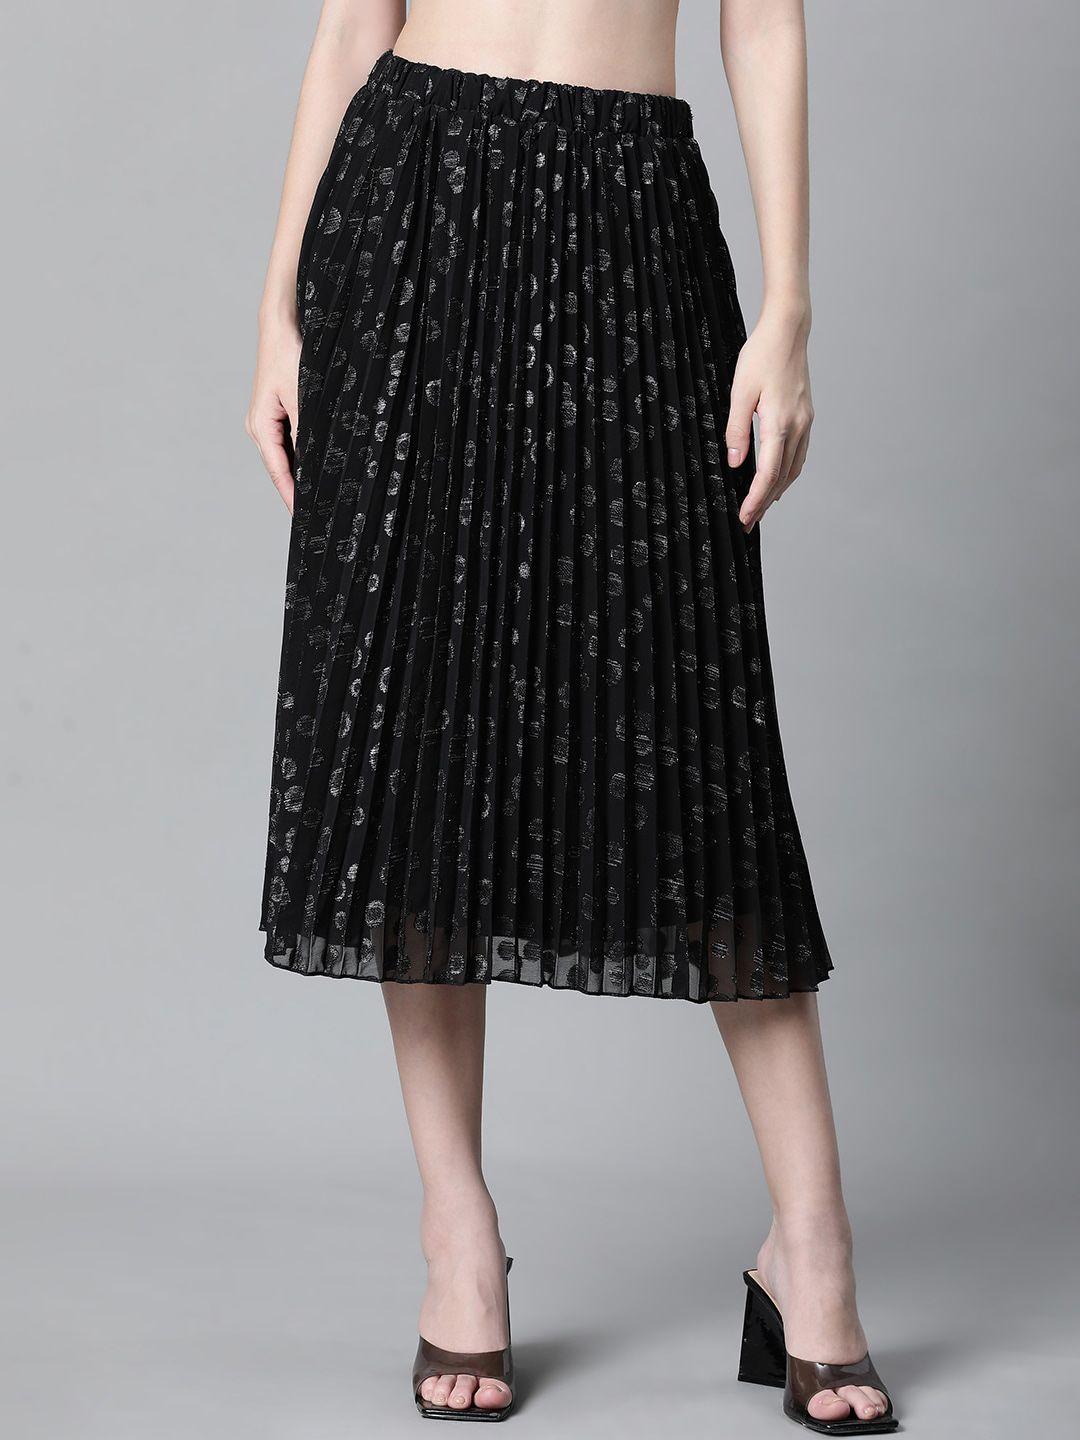 oxolloxo-floral-printed-accordion-pleats-dobby-flared-midi-skirt